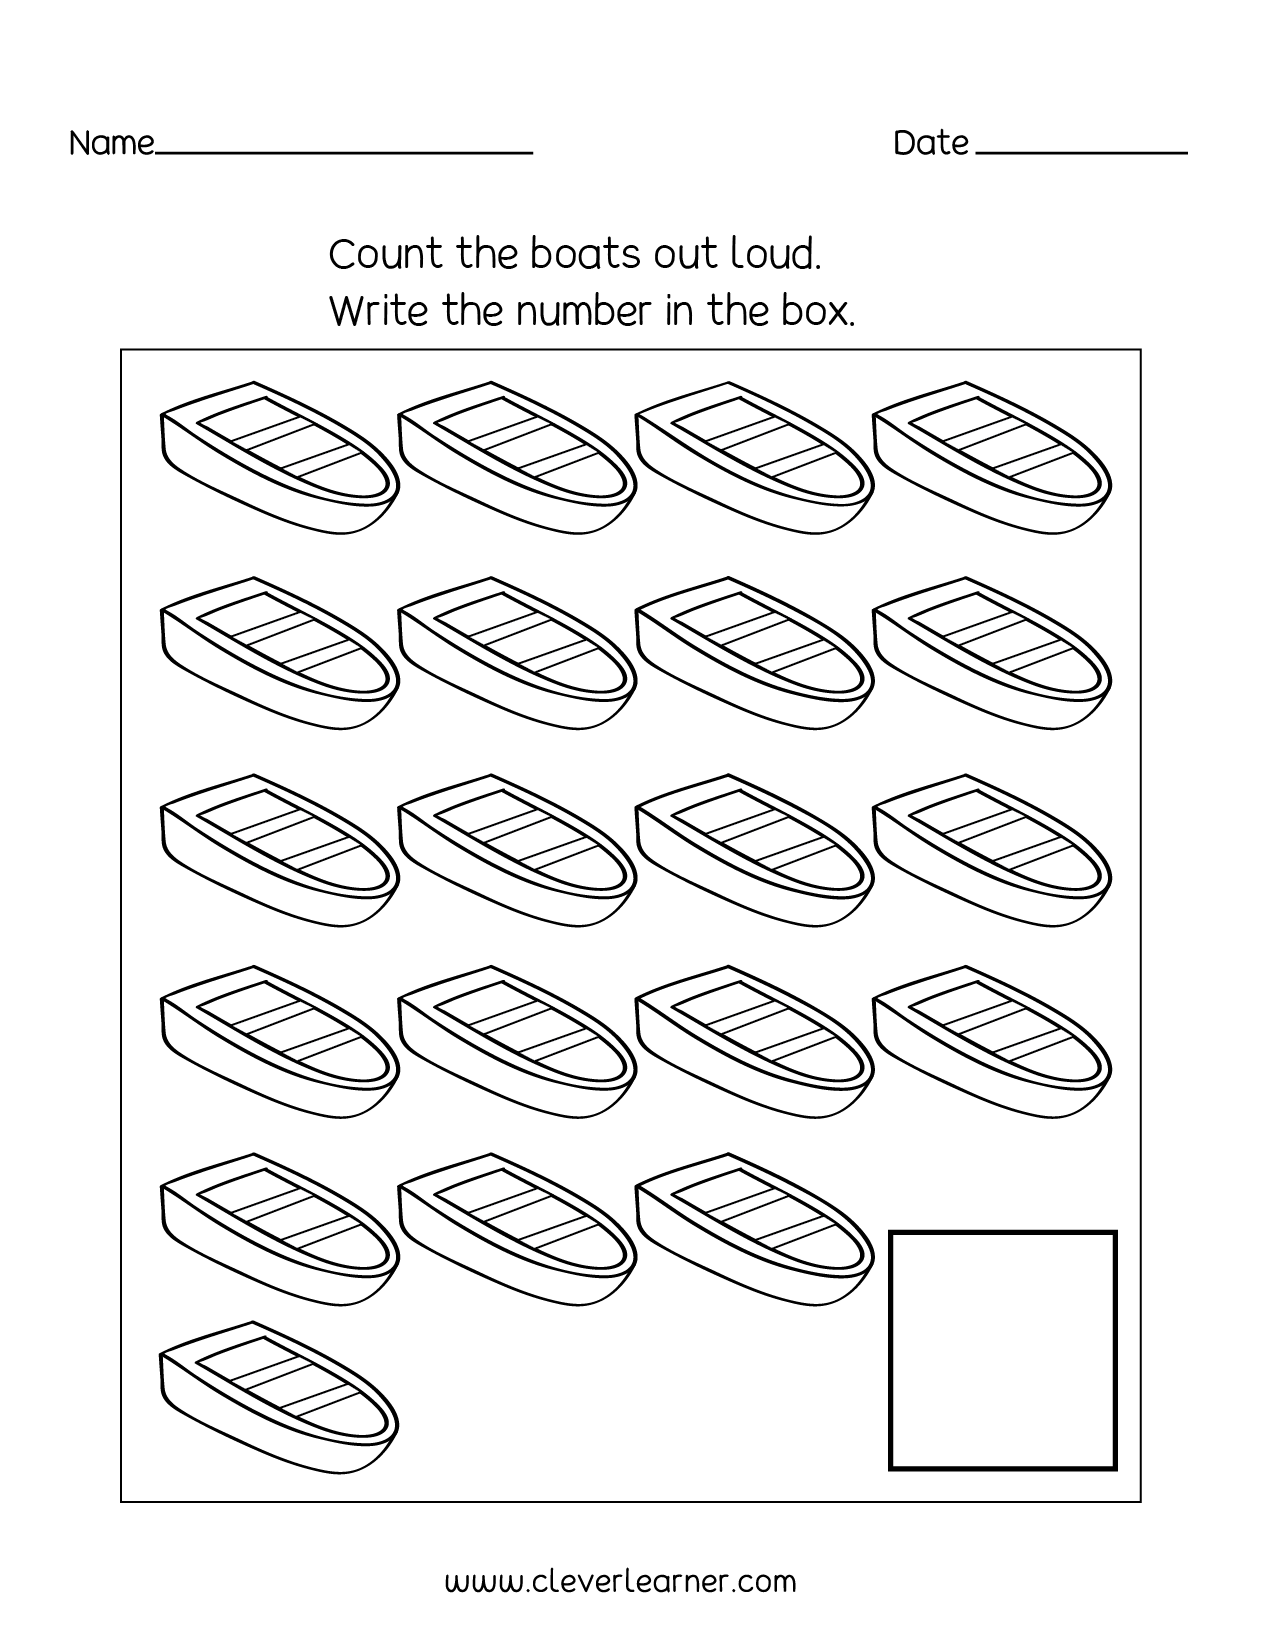 number-20-writing-counting-and-identification-printable-worksheets-for